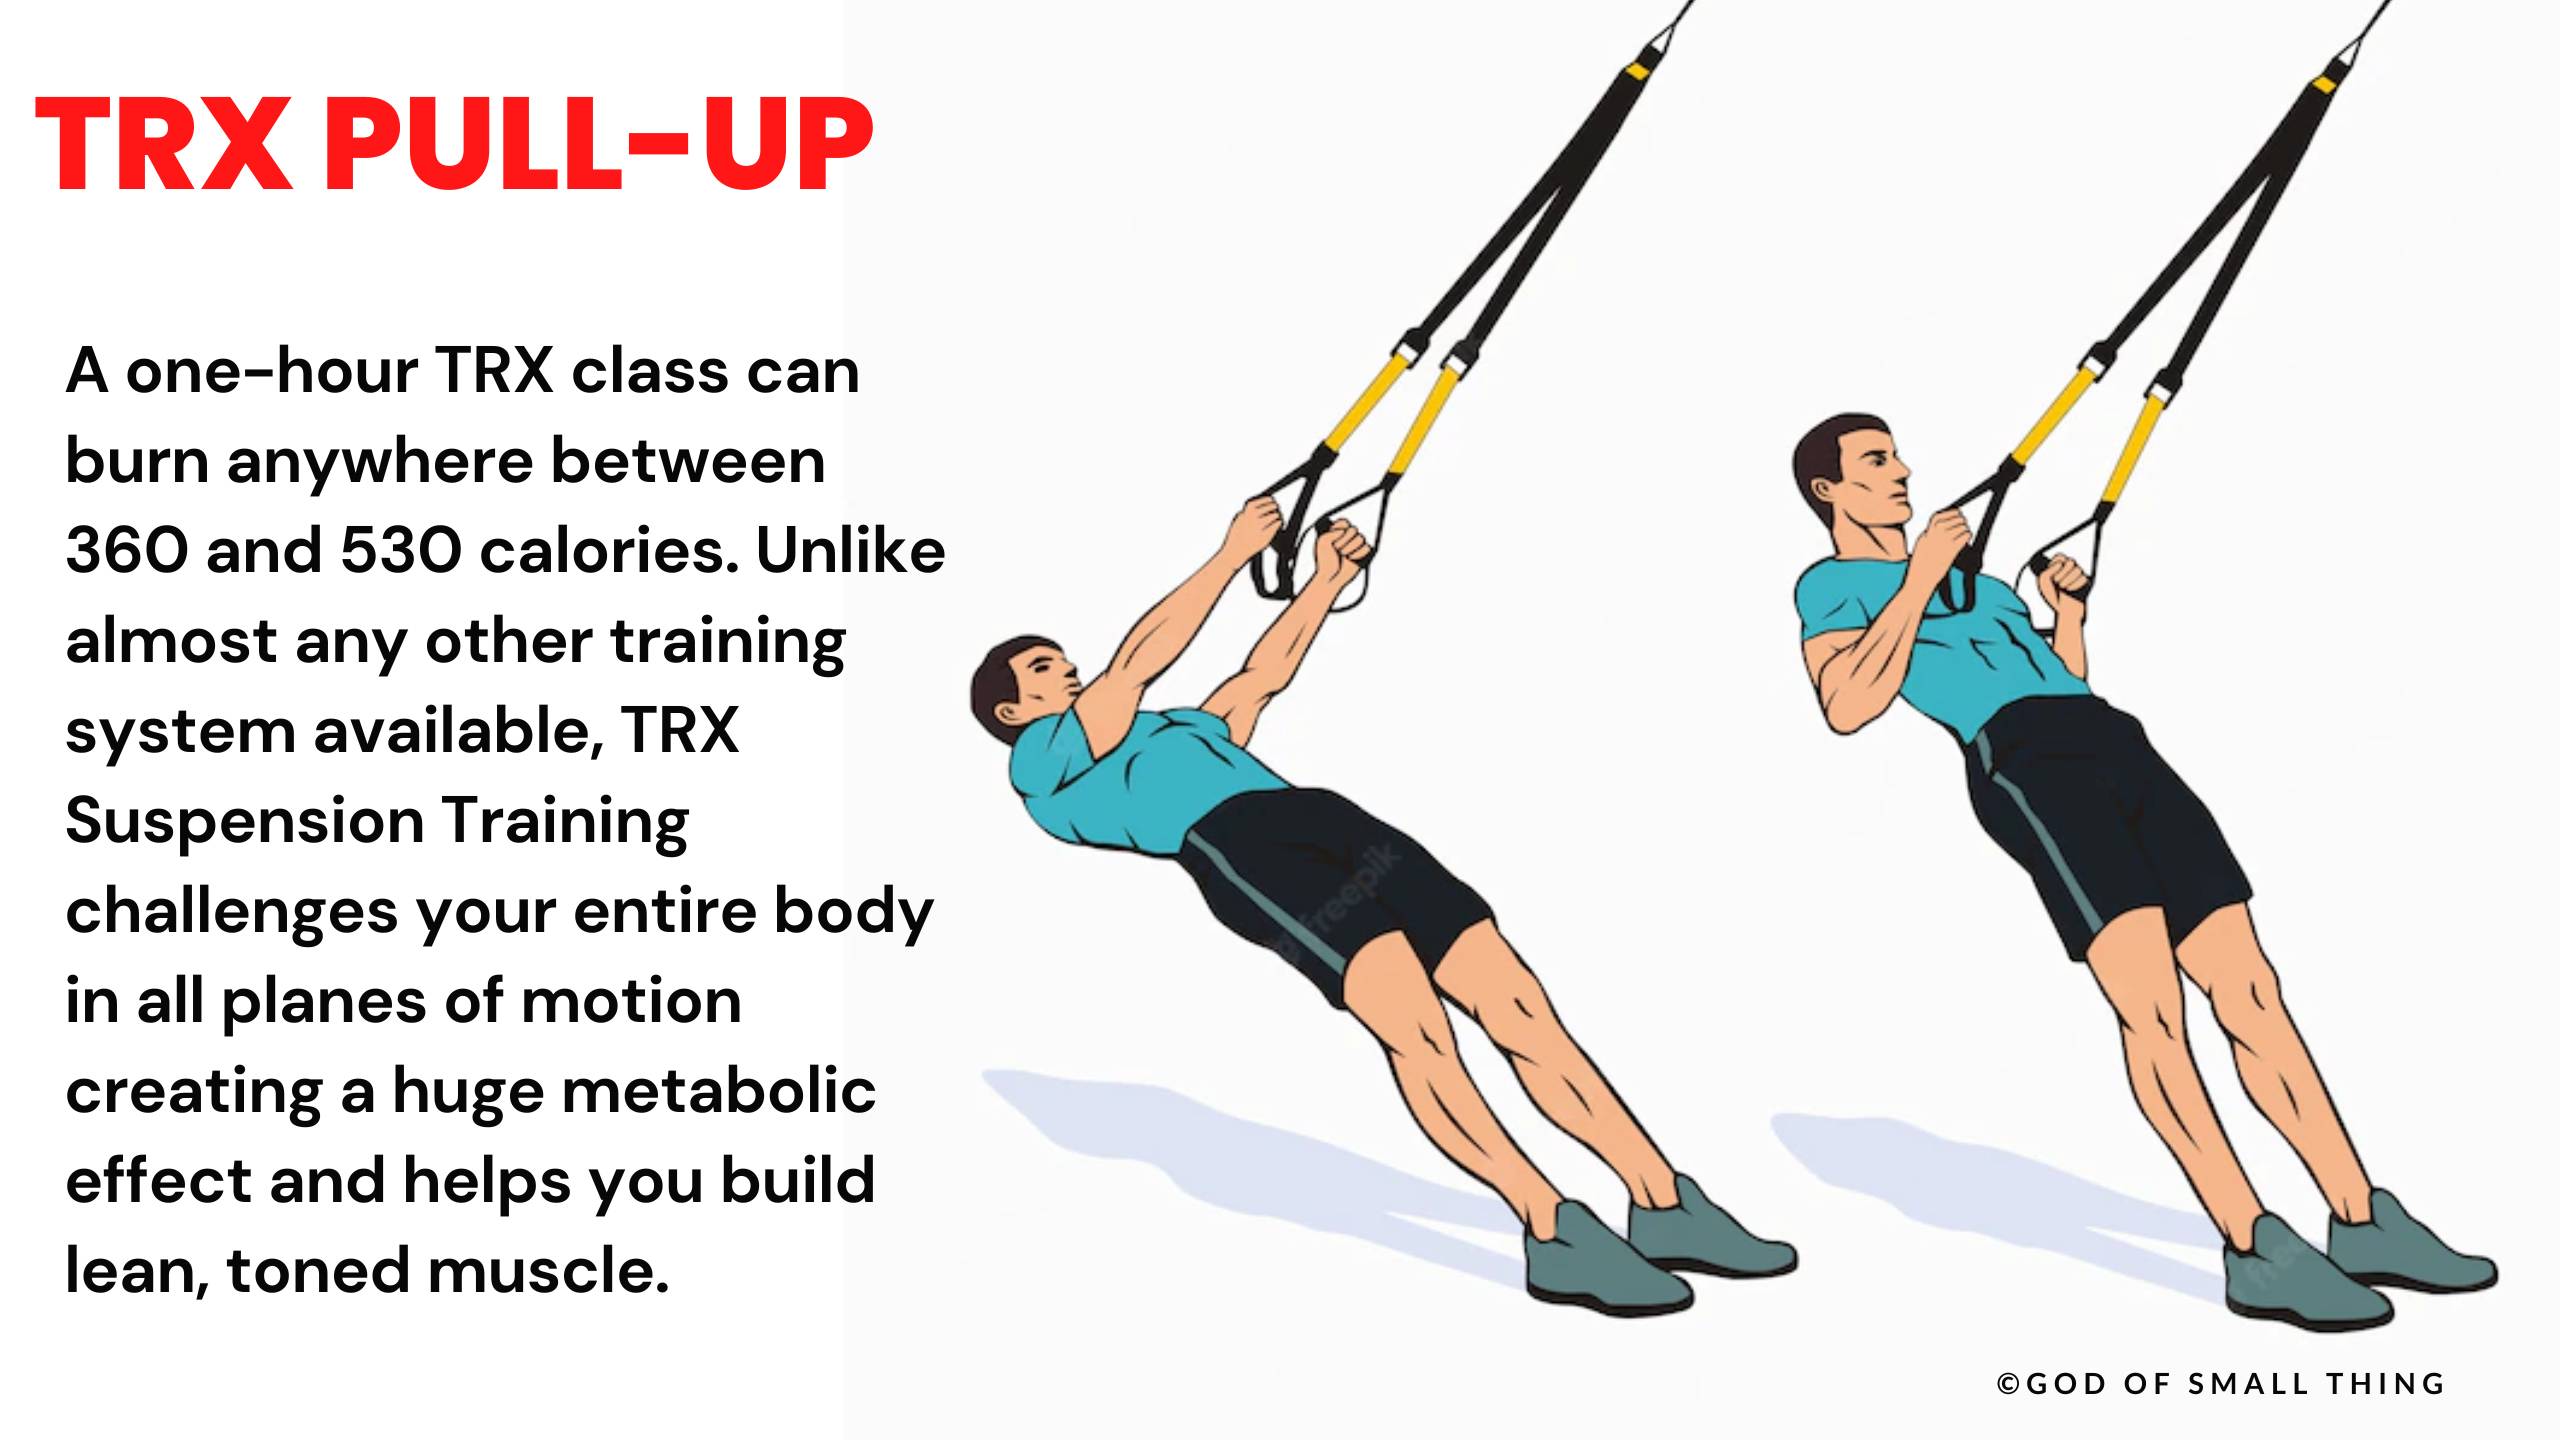 HIIT Workout TRX Pull-up for Weight Loss